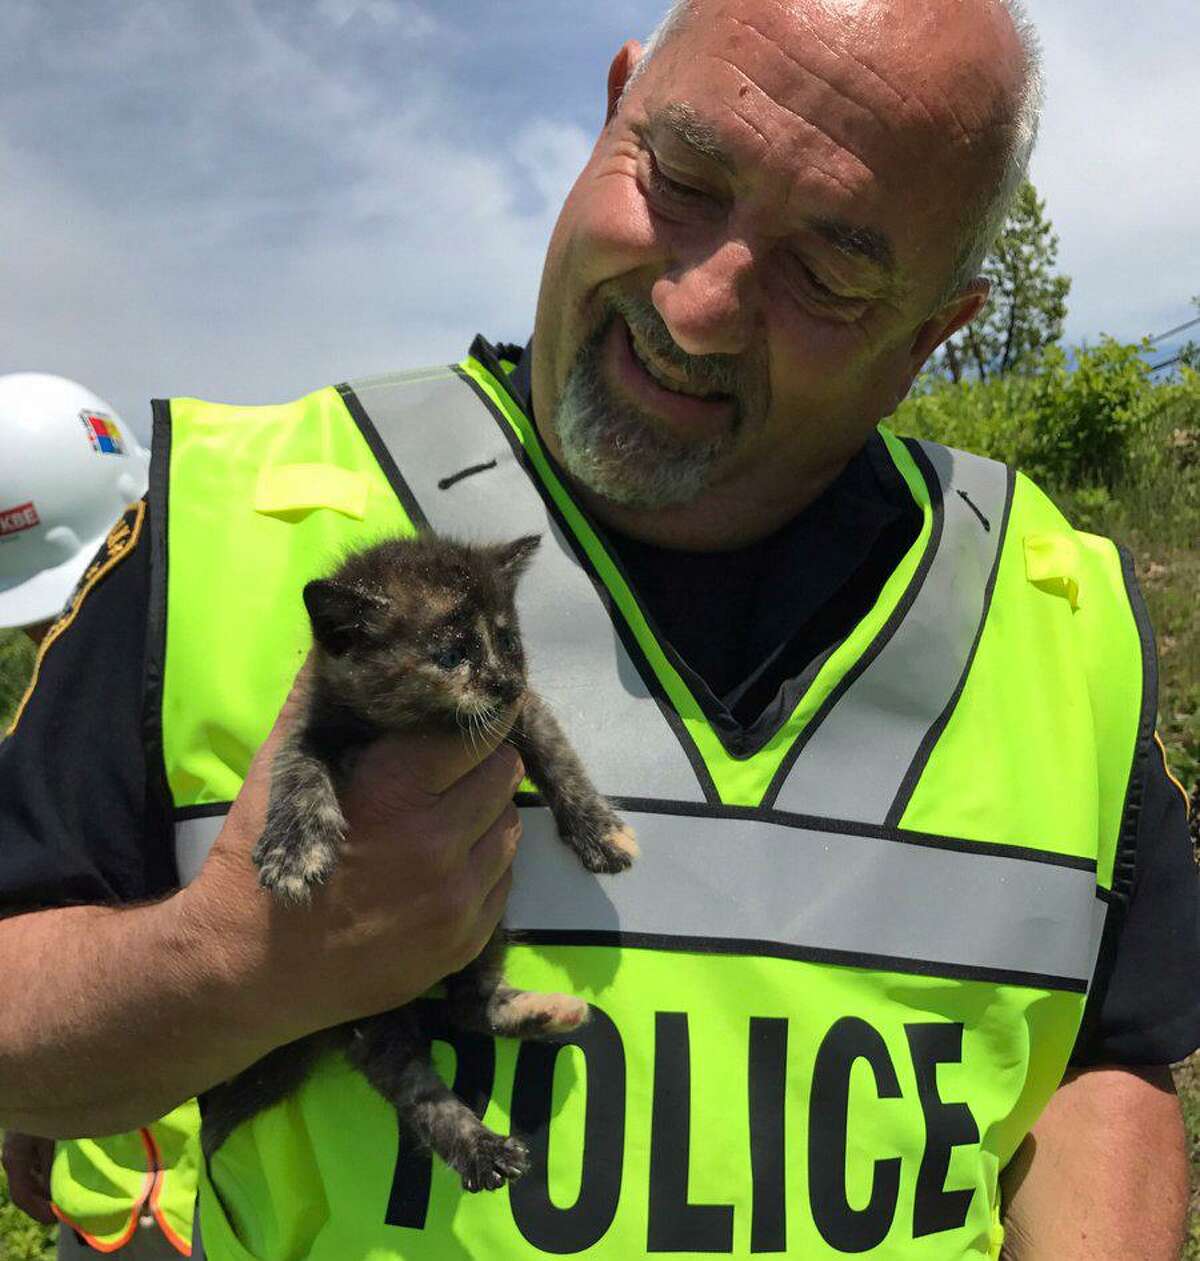 Norwalk Police Department Officer Russell Oullette one of three abandoned kittens that he rescued from a construction site on Reed Street on Tuesday, May 16, 2017. “The kittens were in harm’s way of the large construction vehicles at the site. The kittens were turned over to animal rescue and are in good condition,” Norwalk police posted on their Facebook page.